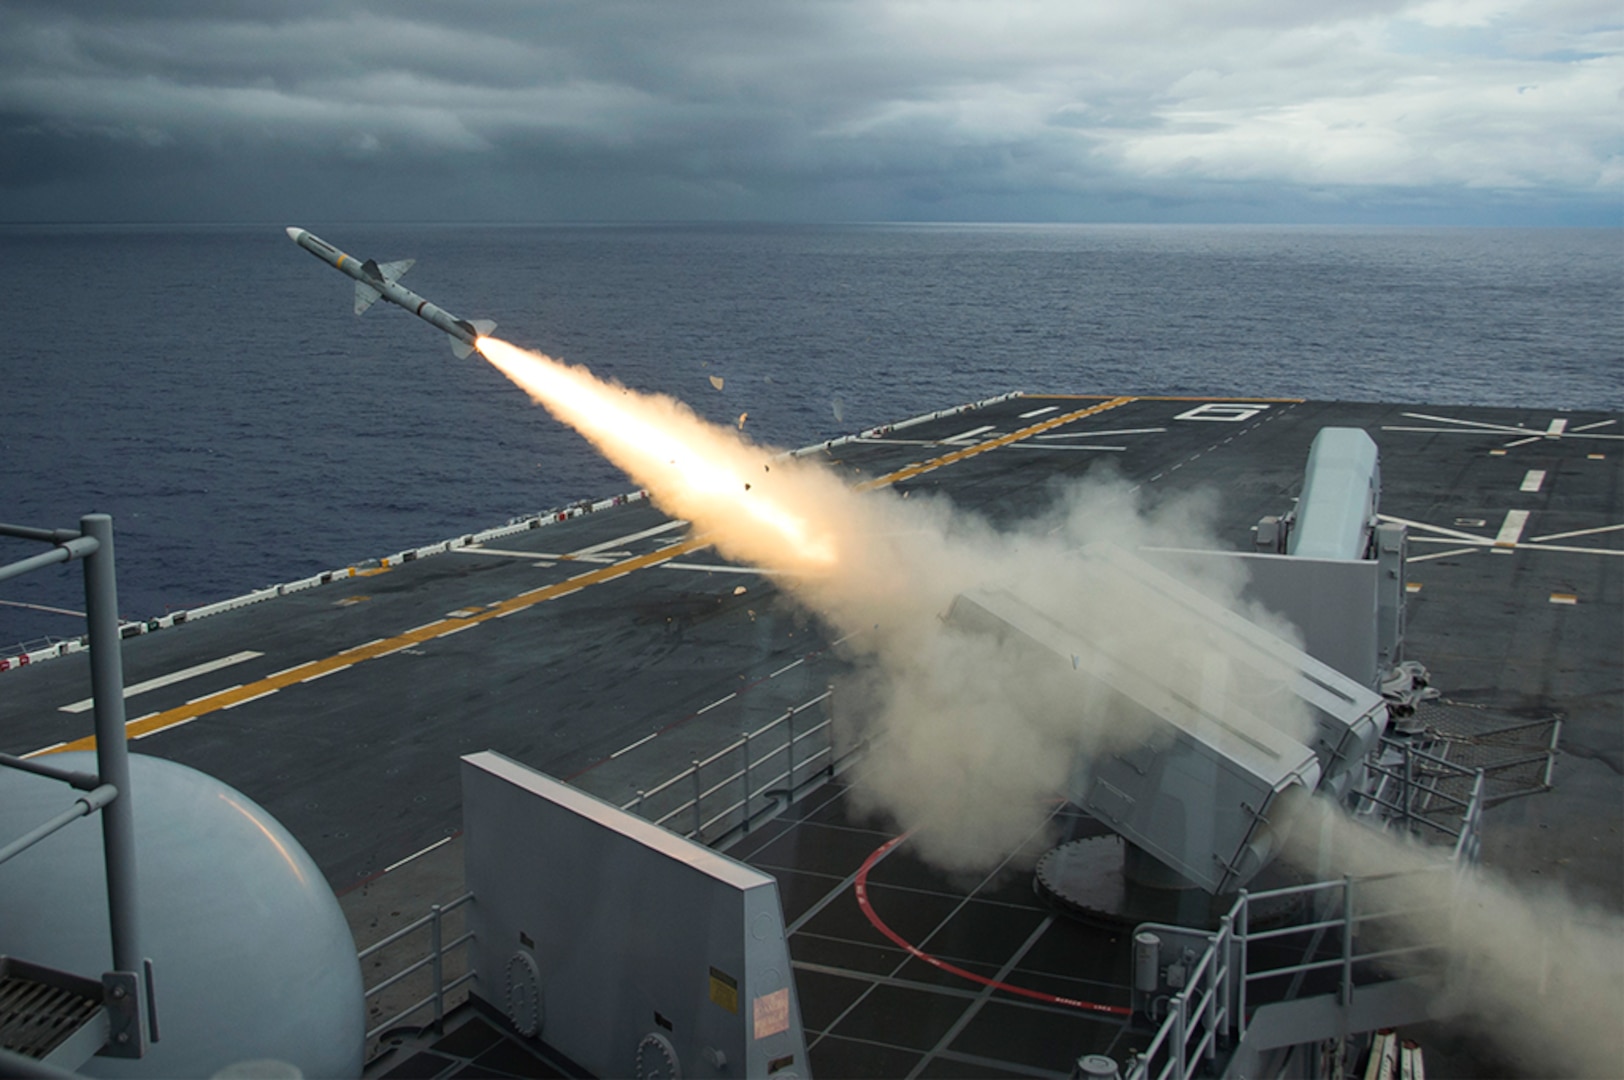 Amphibious assault ship USS Bonhomme Richard (LHD 6) fires a NATO Sea Sparrow surface-to-air missile to intercept a remote-controlled drone as part of Valiant Shield 2016 (VS16). VS16 is a biennial, U.S.-only, field training exercise (FTX) with a focus on integration of joint training among U.S. forces. This training enables real-world proficiency in sustaining joint forces through detecting, locating, tracking and engaging unity at sea, in the air, on land, and in cyberspace in response to a range of mission areas. Bonhomme Richard, flagship of the Bonhomme Richard Expeditionary Strike Group, is operating in the Philippine Sea in support of security and stability in the Indo-Asia Pacific region. 